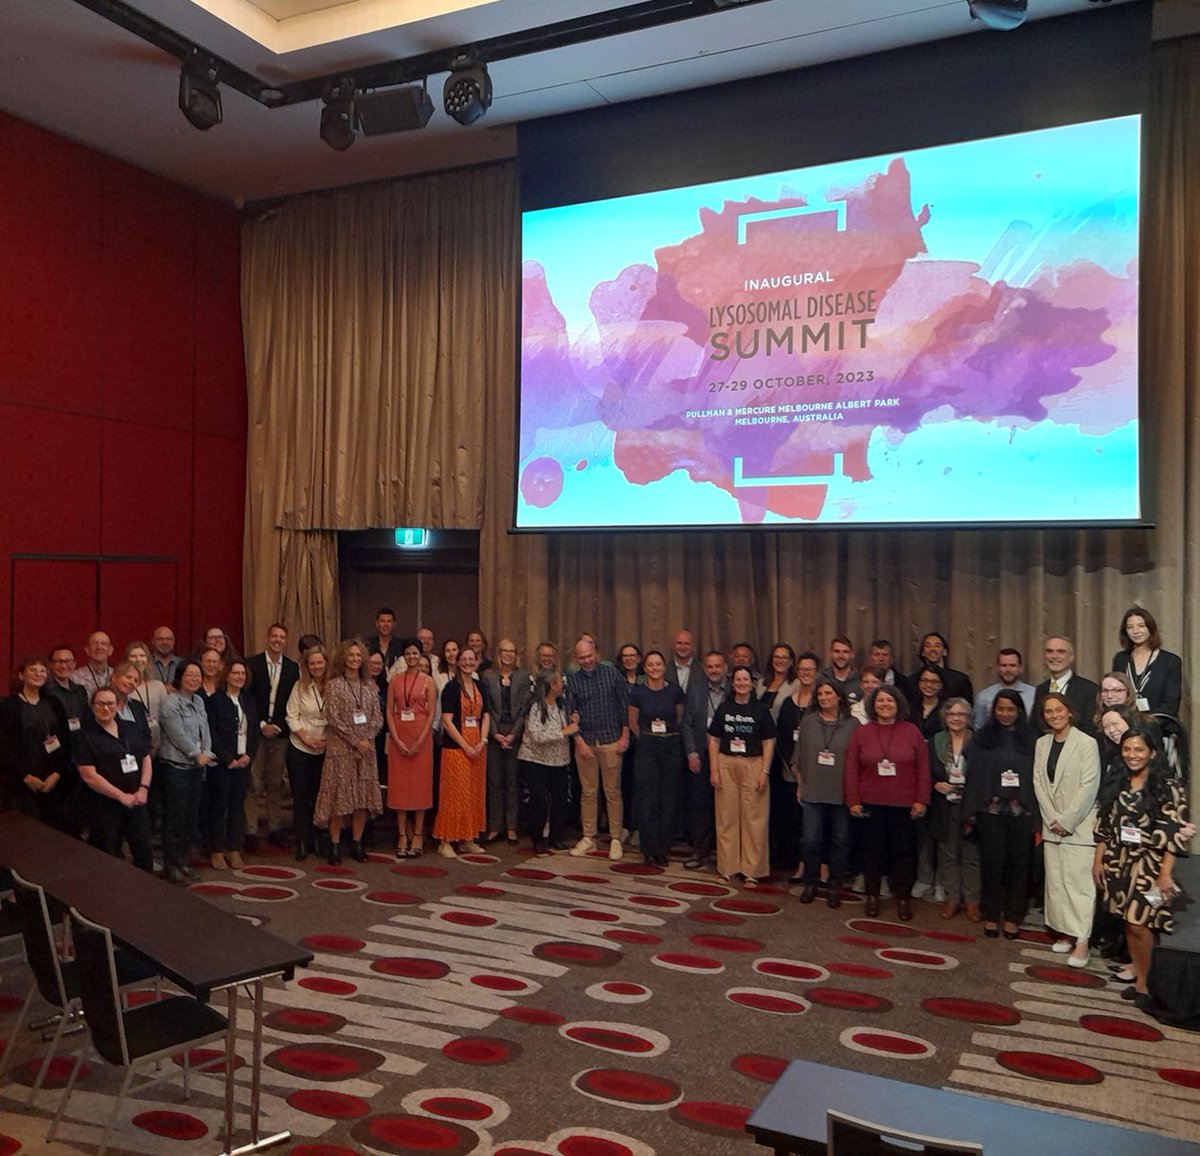 The @SFCFoundtn team were excited to be part of the Lysosomal Disease Summit, organised by @FabryAustralia, that brought together researchers, clinicians, patient advocates and industry reps to discuss research & care for this group of diseases. READ MORE: bit.ly/3MxQKRS